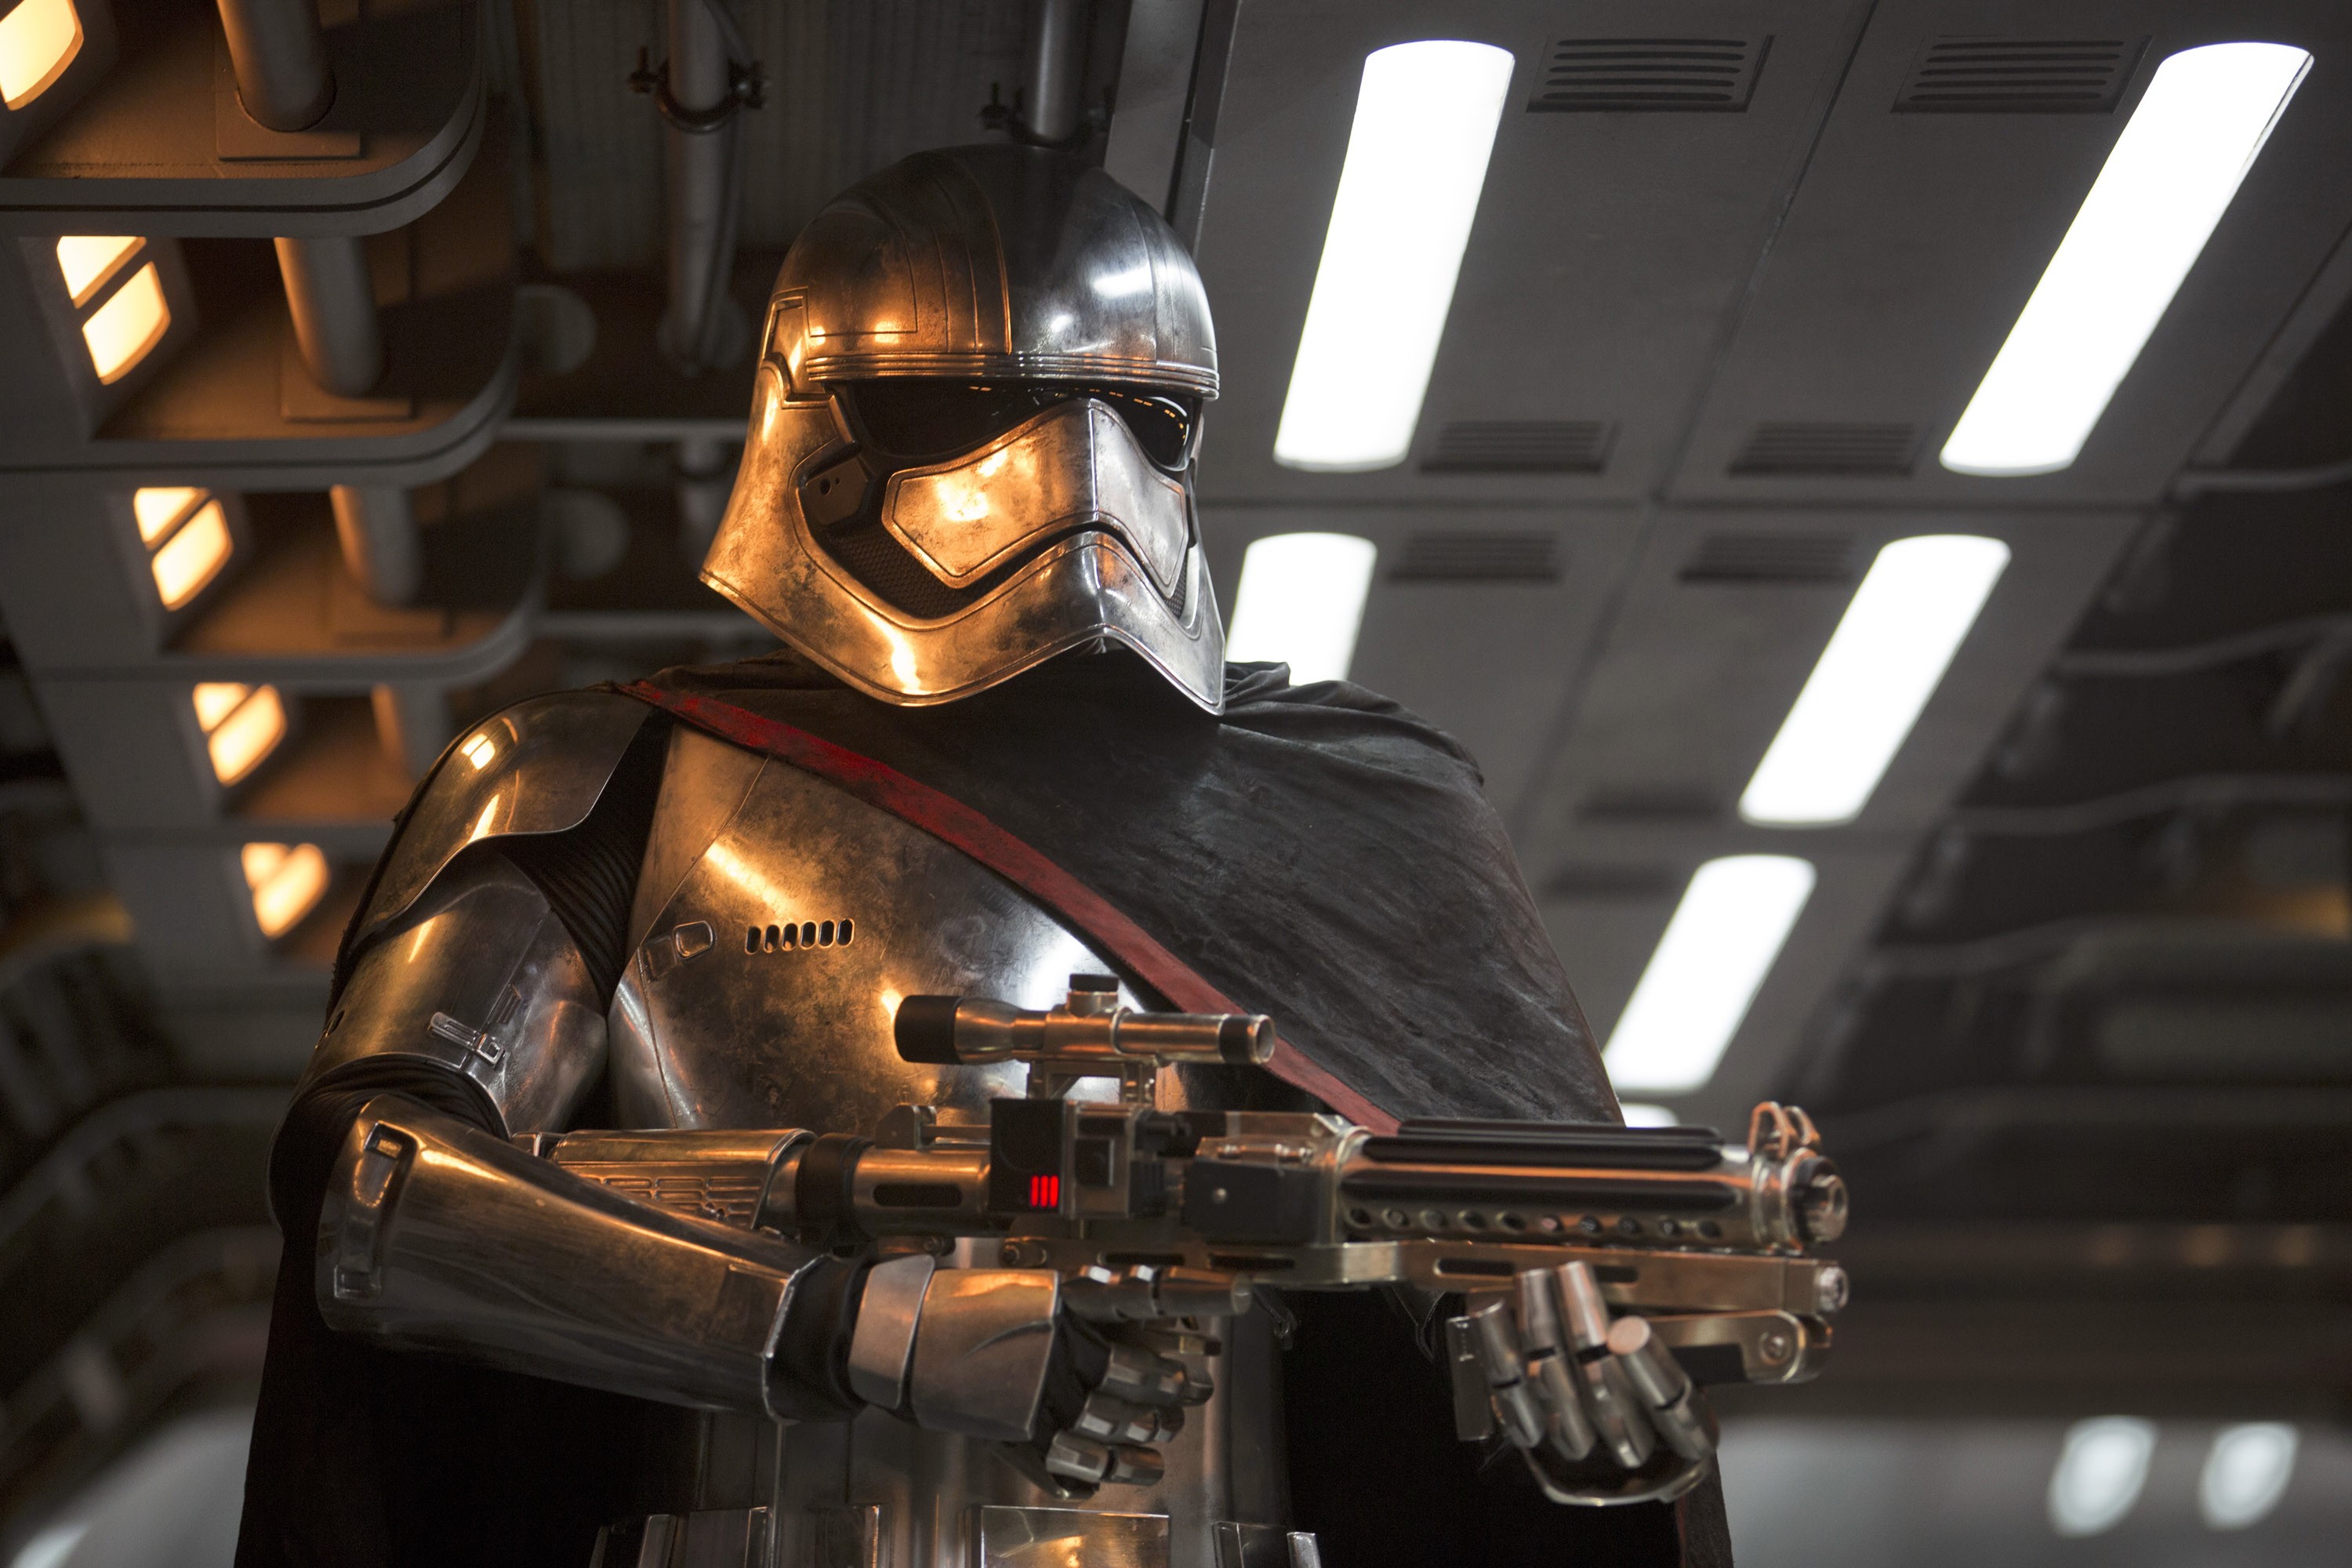 General 3000x2000 Star Wars Star Wars: The Force Awakens Captain Phasma Star Wars Villains The First Order movies armor blaster science fiction